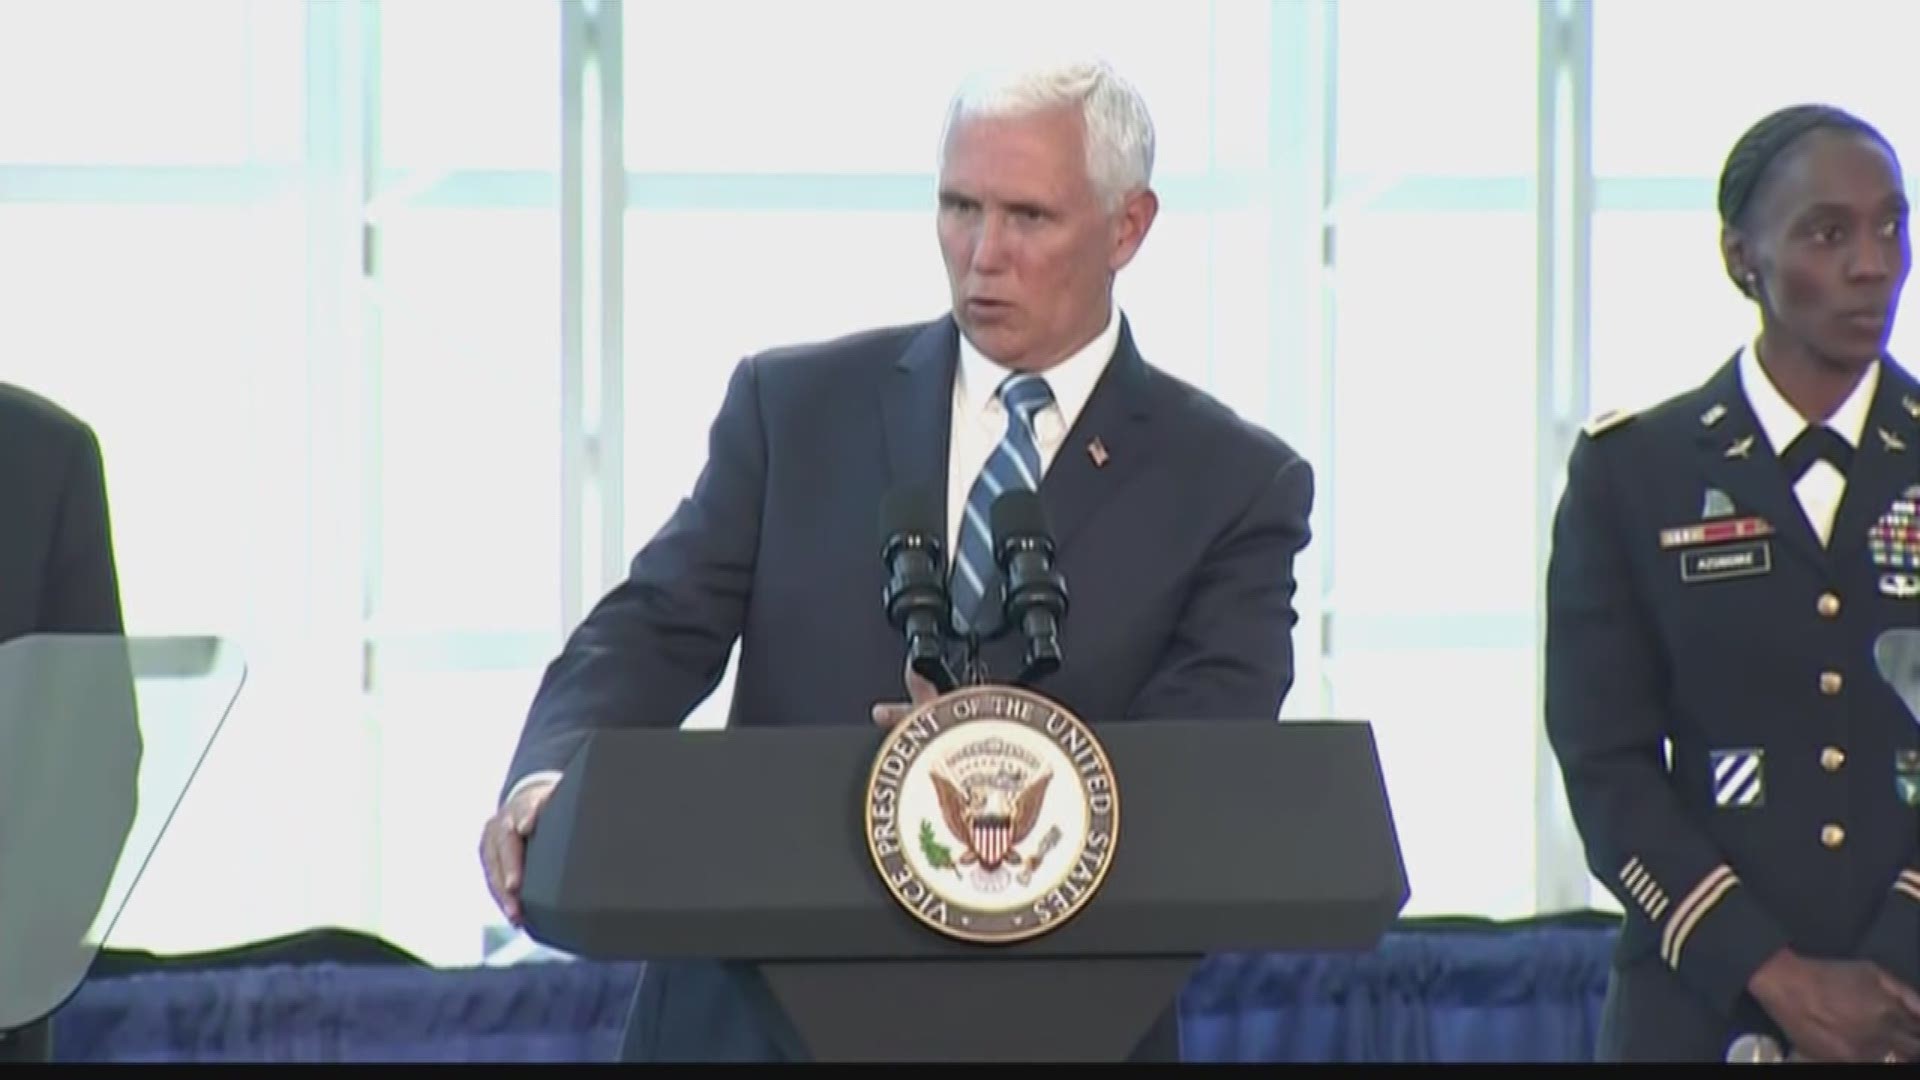 Vice President Mike Pence declared Tuesday that Venezuela's authoritarian leader "must go" as the U.S. Navy launched a hospital ship on a five-month mission to help Latin American countries struggling to absorb migrants from the crisis-wracked country.

Pence briefly toured the ship at Miami's cruise liner terminal ahead of its Wednesday departure to help Venezuelan migrants in countries including Colombia, Ecuador, Panama, Costa Rica and the Dominican Republic. It will also make stops in Haiti, Jamaica and several other Caribbean nations.

After the tour, the vice president spoke before Venezuelan exiles, who have become an increasing presence in the swing state of Florida, where President Donald Trump chose to announce his reelection campaign later Tuesday in Orlando. Florida is home to an estimated 190,000 Venezuelans, many of whom have found common cause with exiles of other socialist governments such as Cuba and Nicaragua.